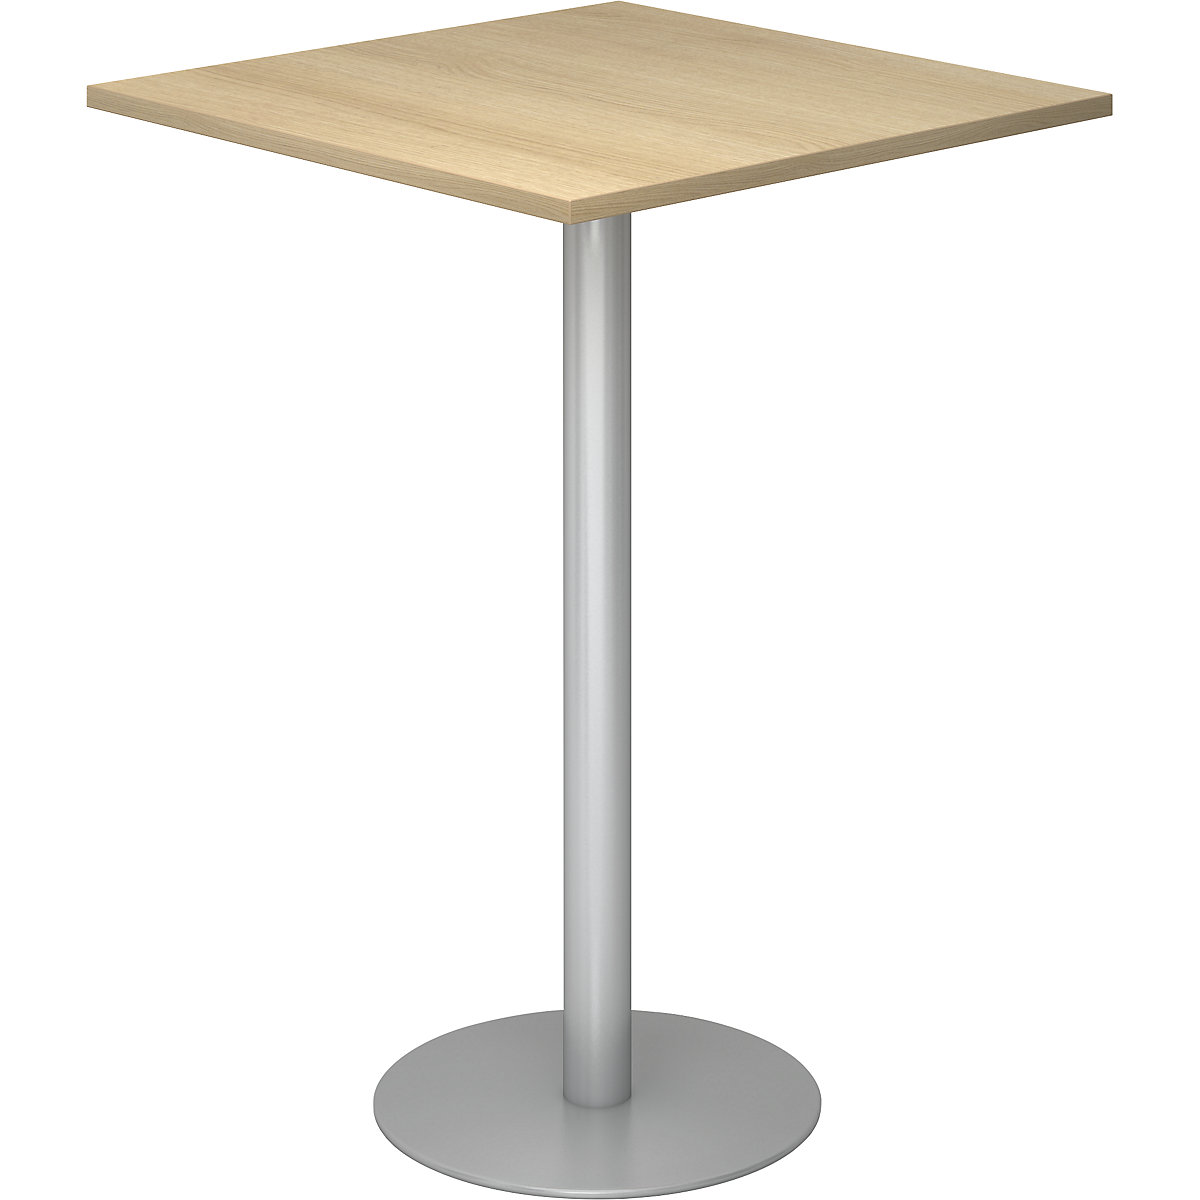 Pedestal table, LxW 800 x 800 mm, 1116 mm high, silver frame, tabletop in oak finish-4